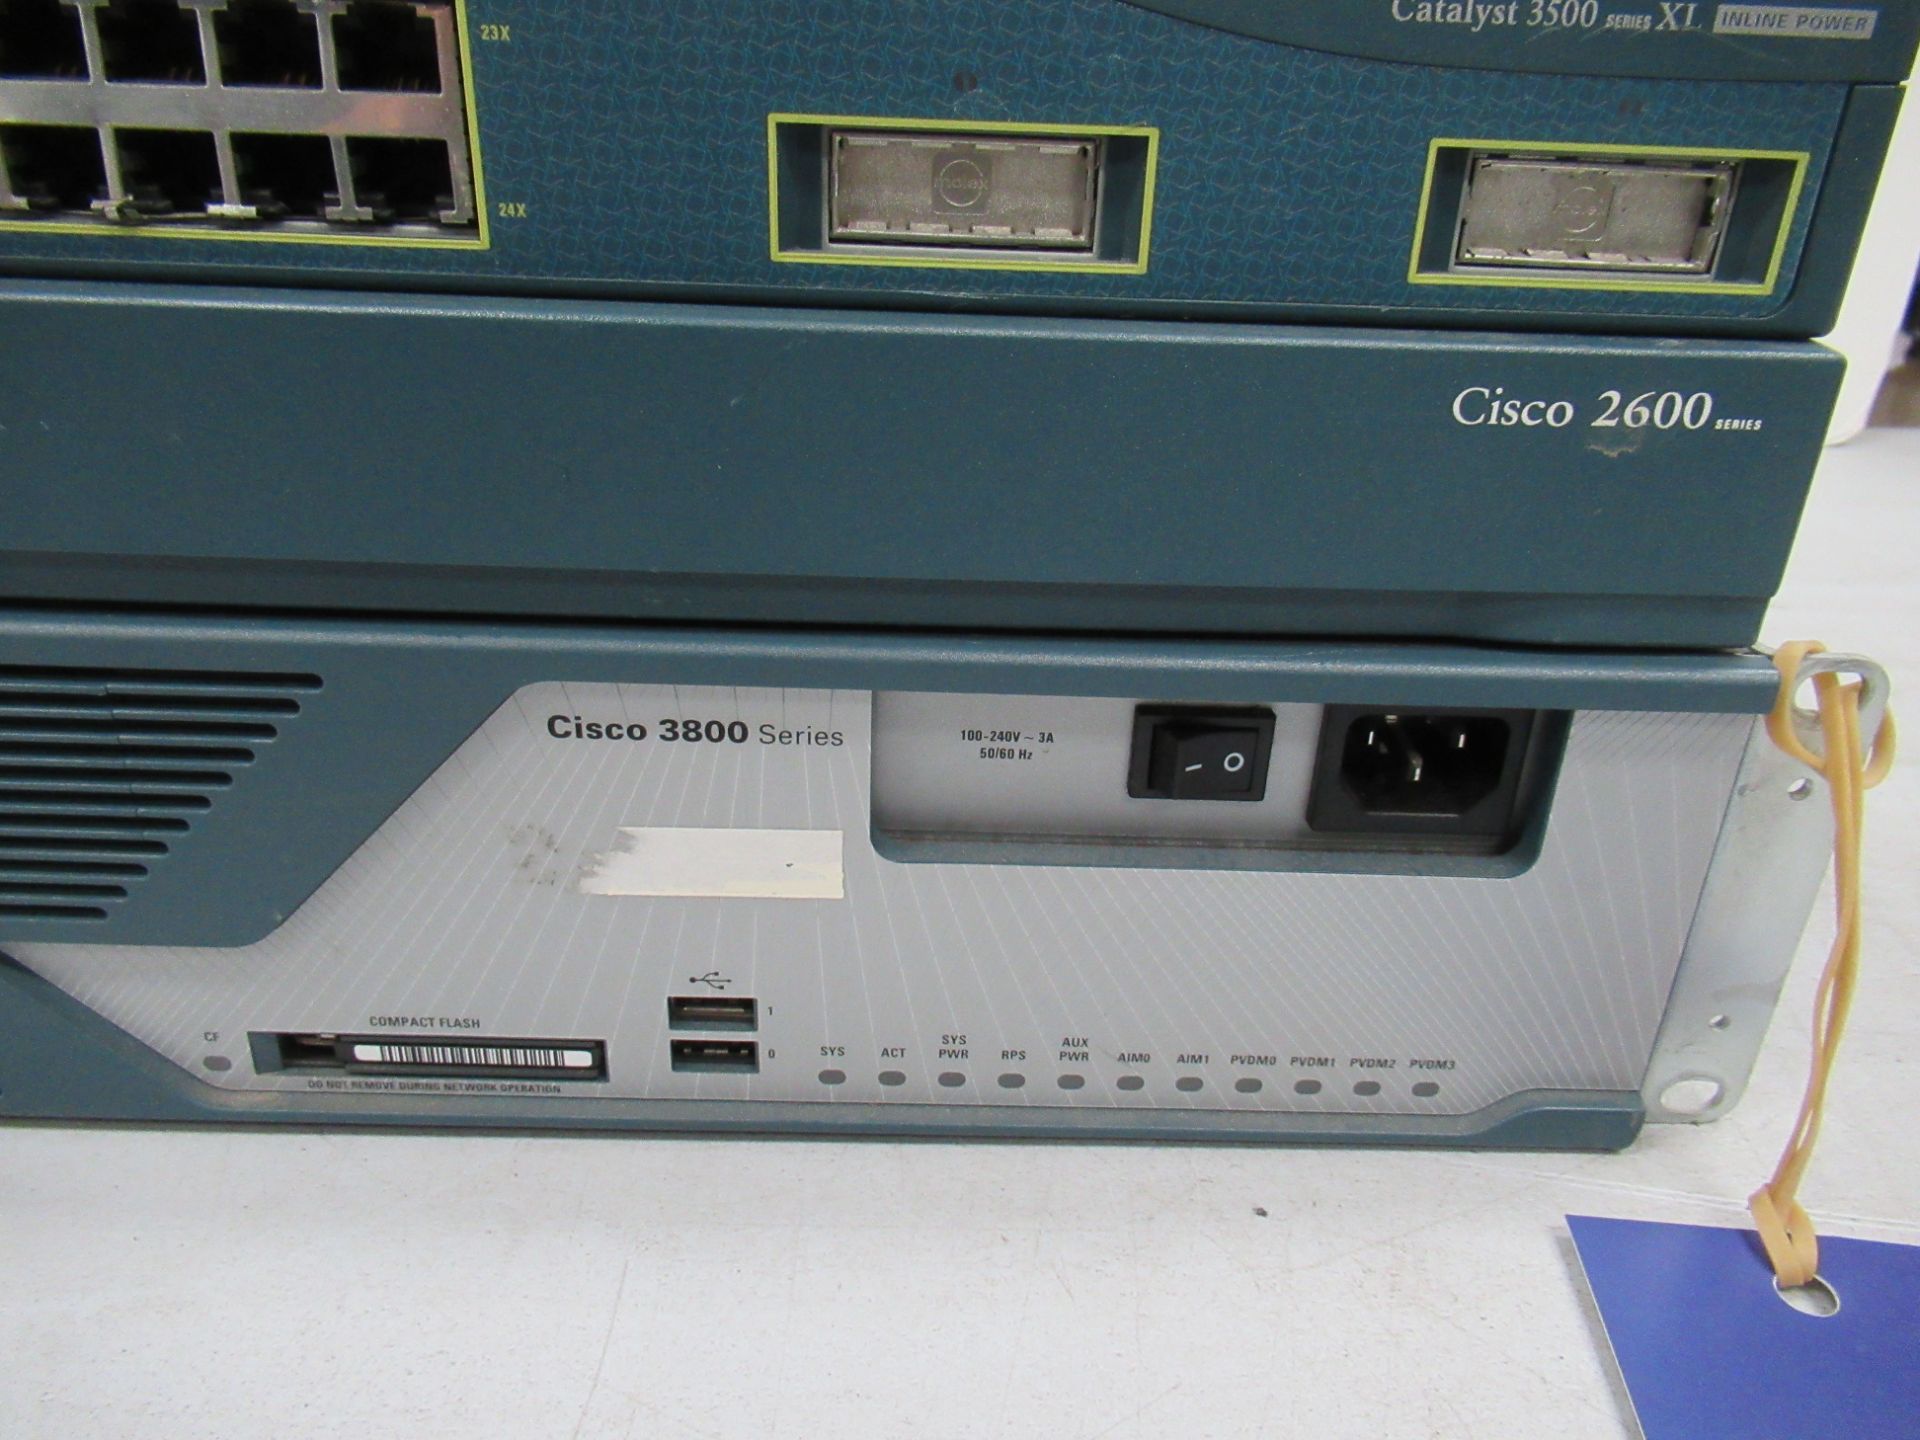 Cisco 3800 Series Console, Series 3500 XL Channel Switch and 2600 Console - Image 2 of 5